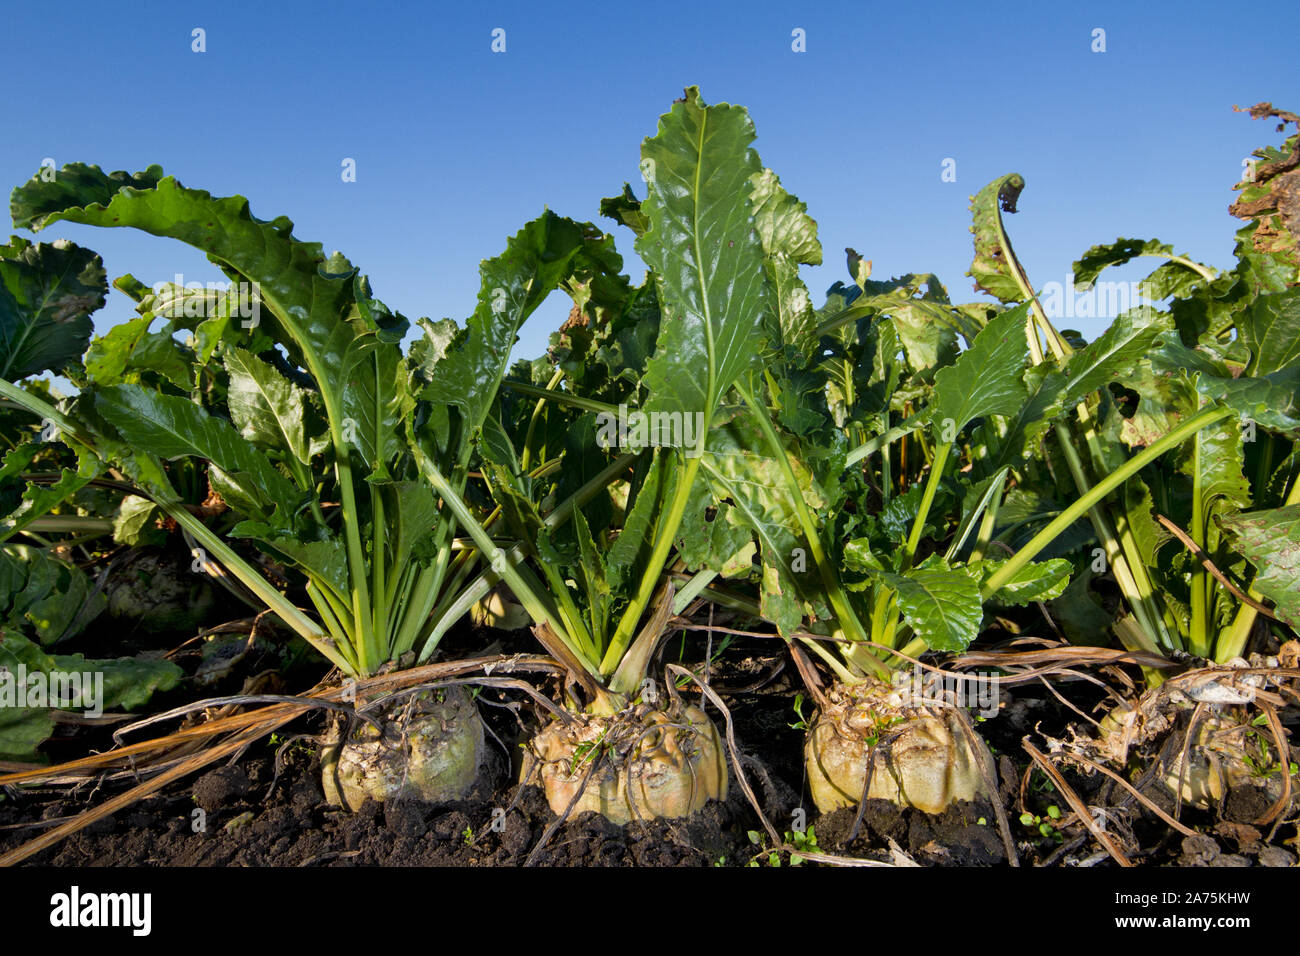 Close-up of Sugar beet, growing on a field under a blue sky Stock Photo